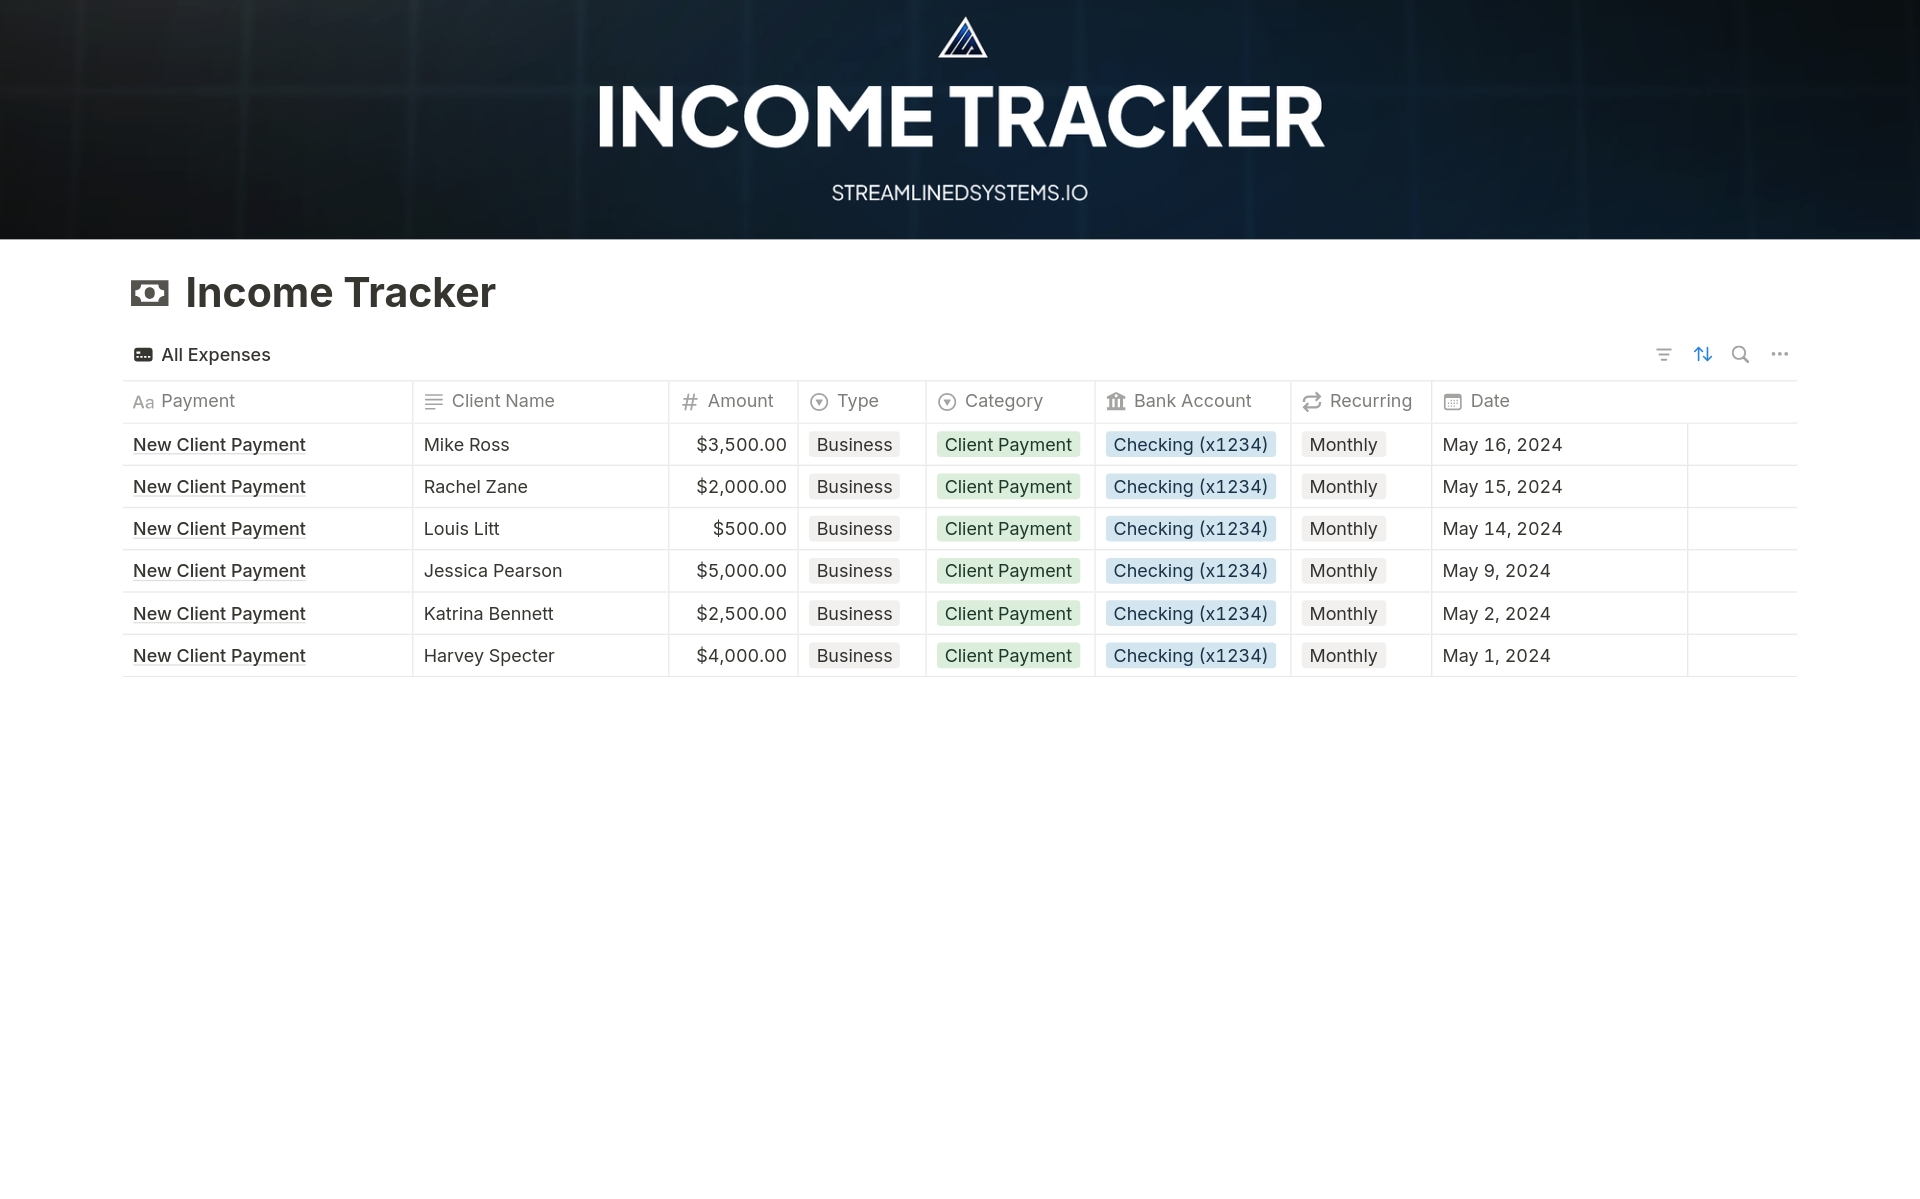 Record and analyze your income sources.